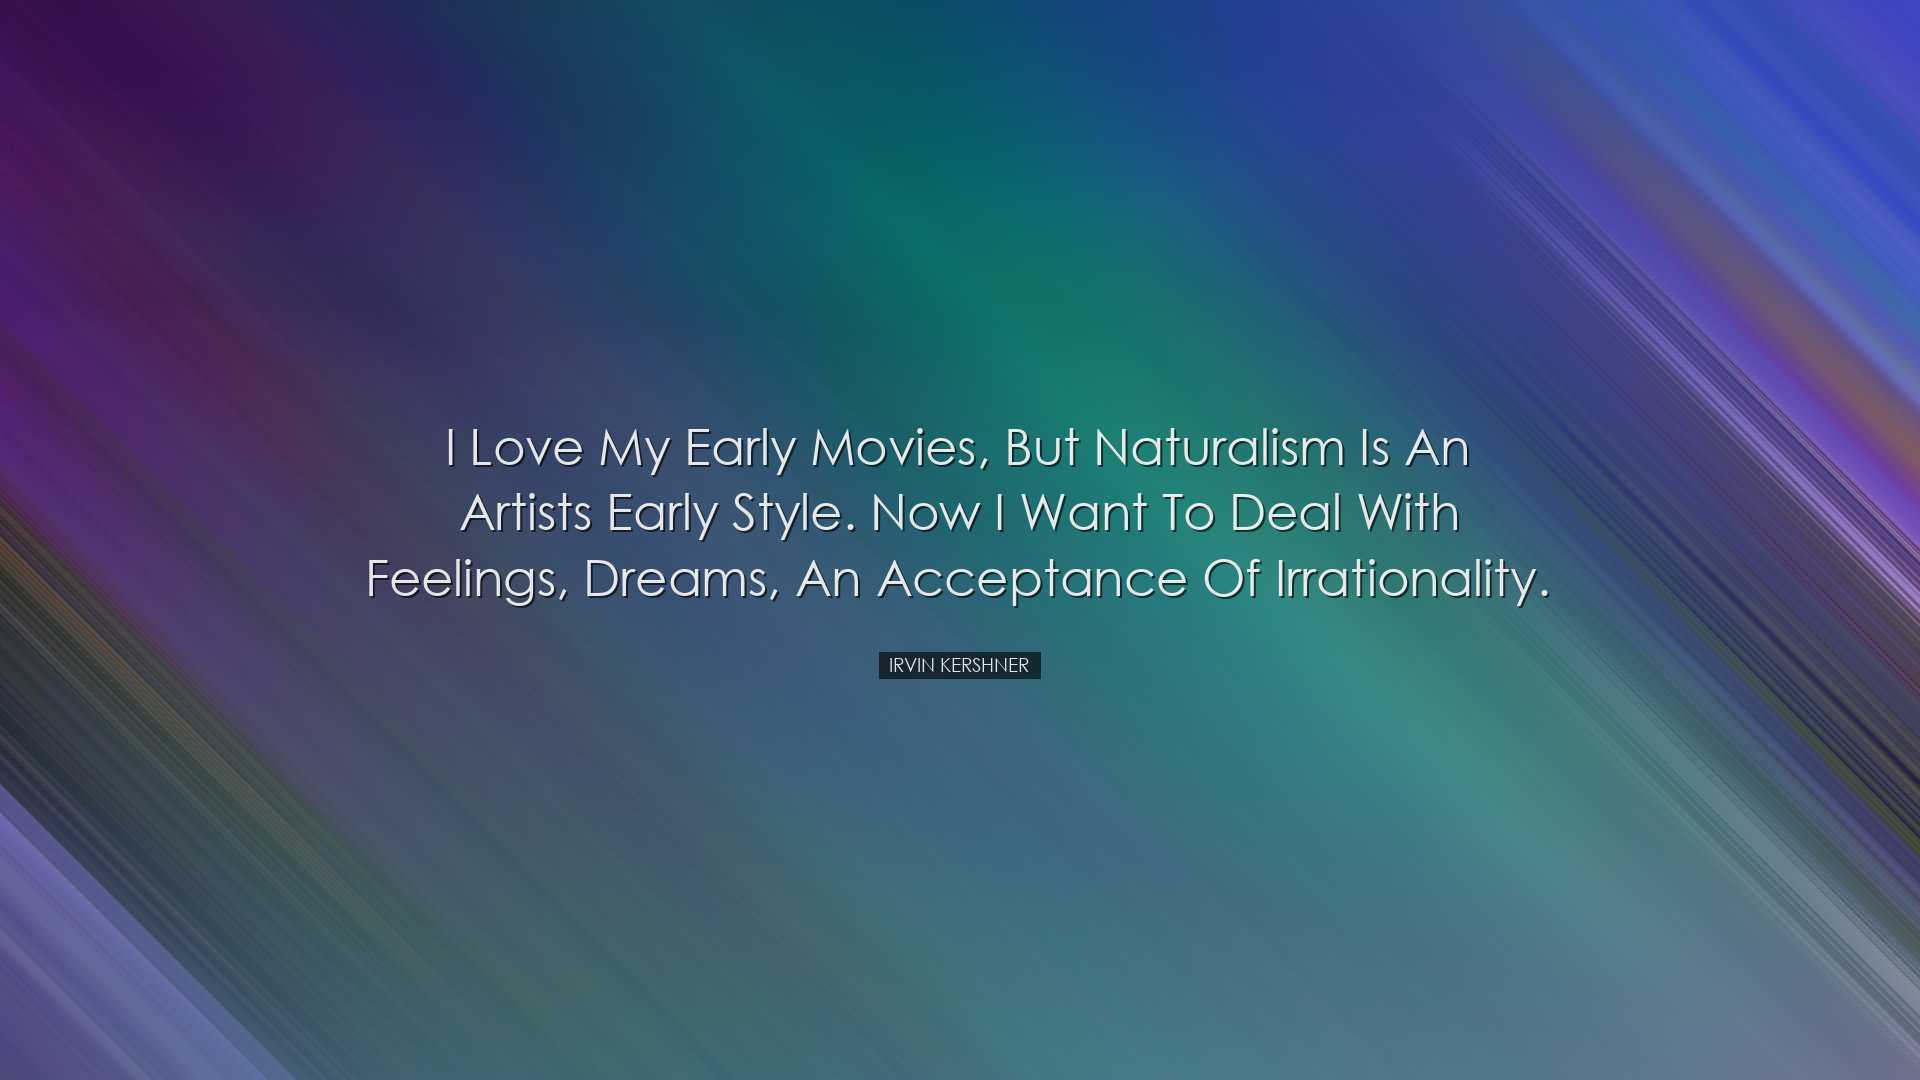 I love my early movies, but naturalism is an artists early style.